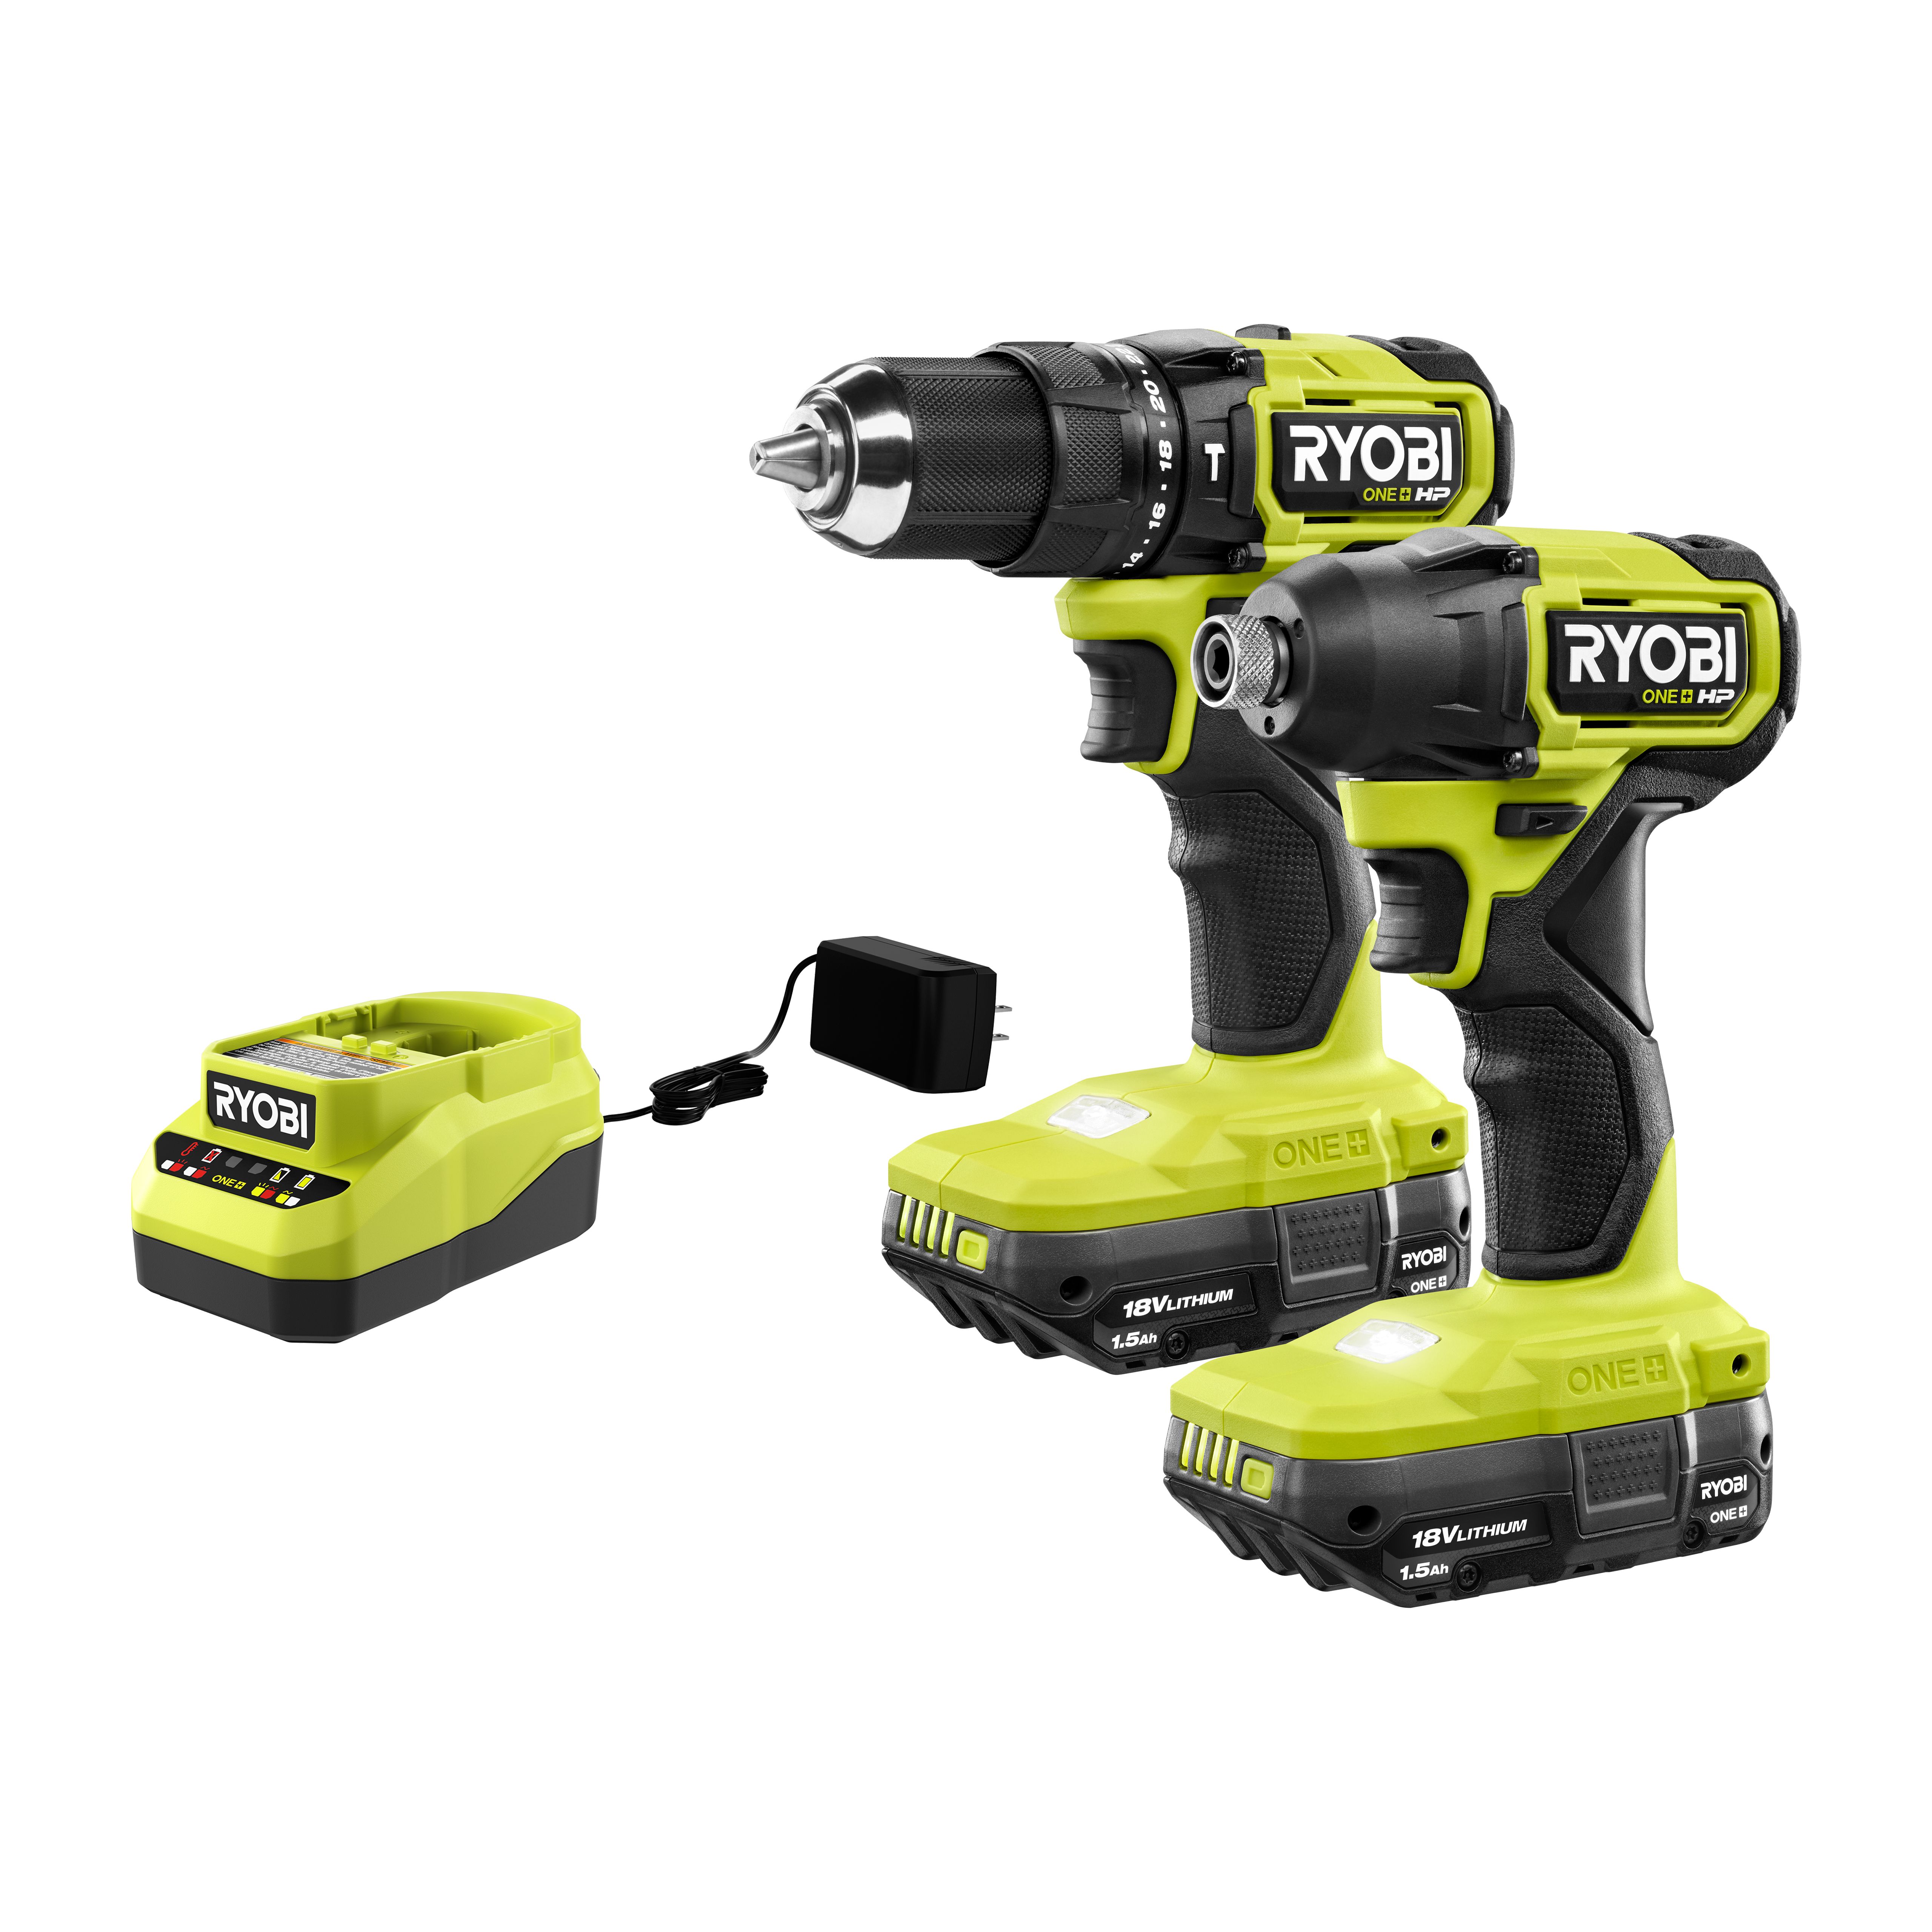 18V ONE+ HP COMPACT BRUSHLESS HAMMER DRILL AND IMPACT DRIVER KIT